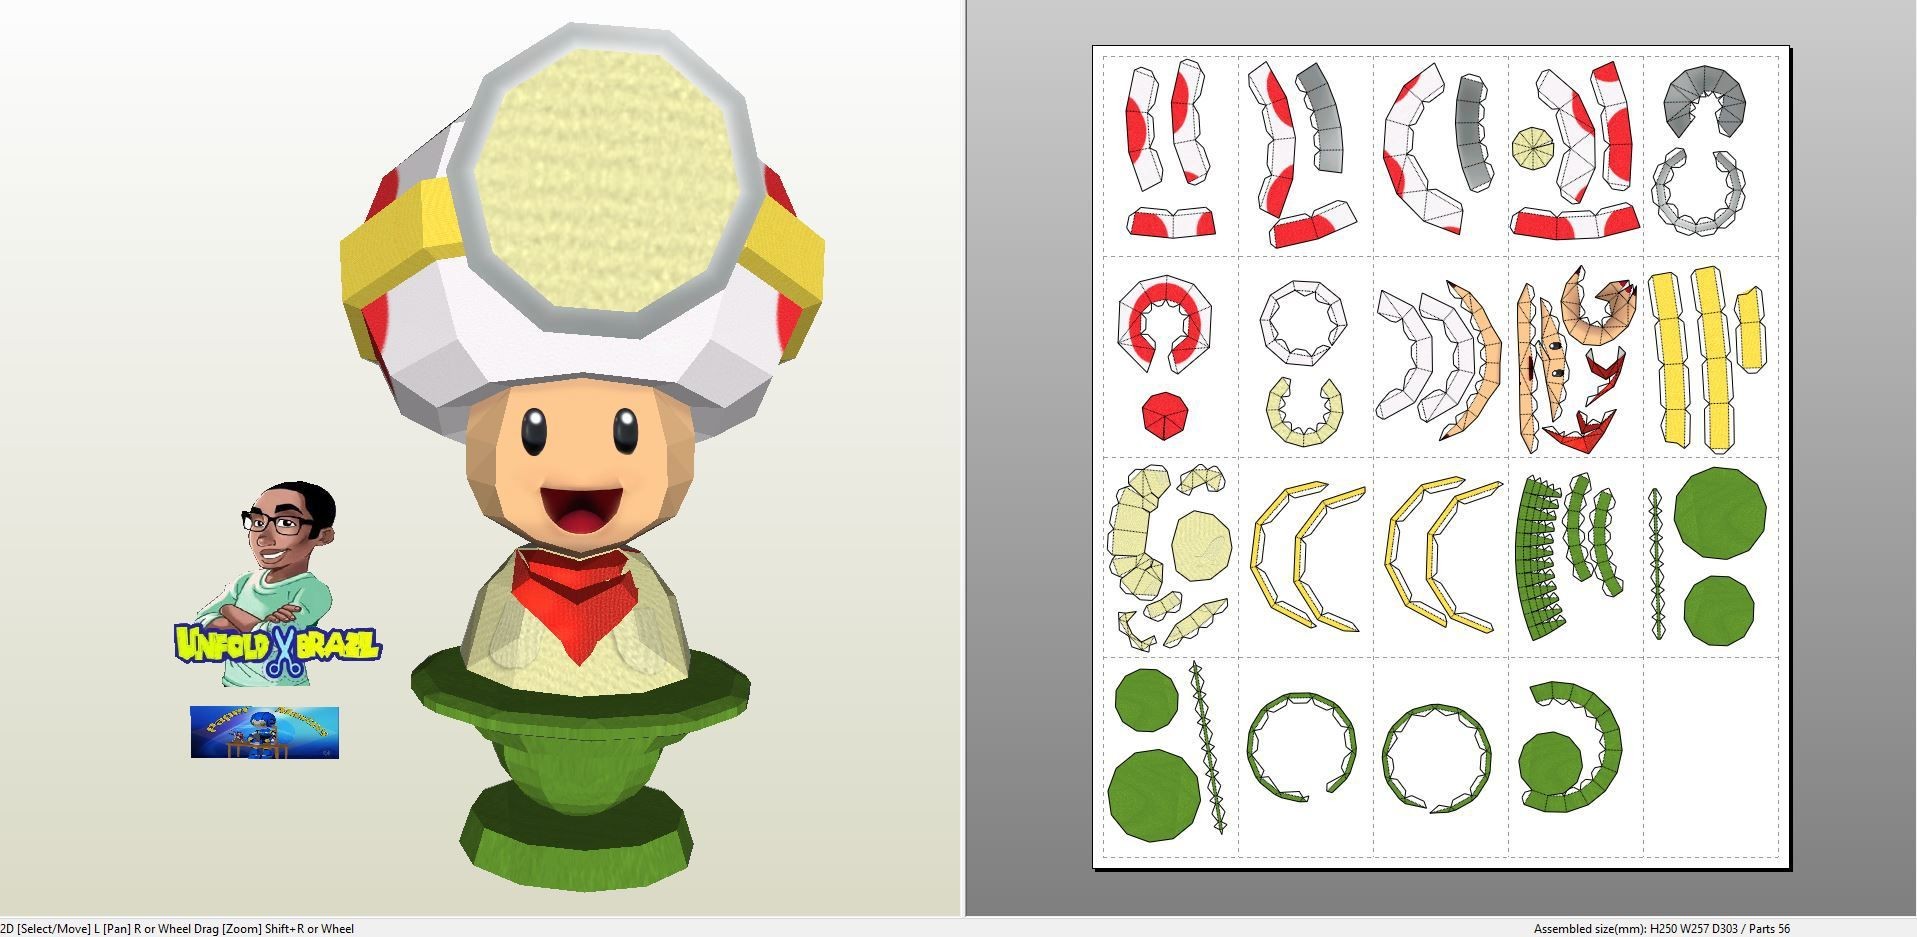 Yoshi Papercraft Papercraft Pdo File Template for Super Mario Captain toad Bust